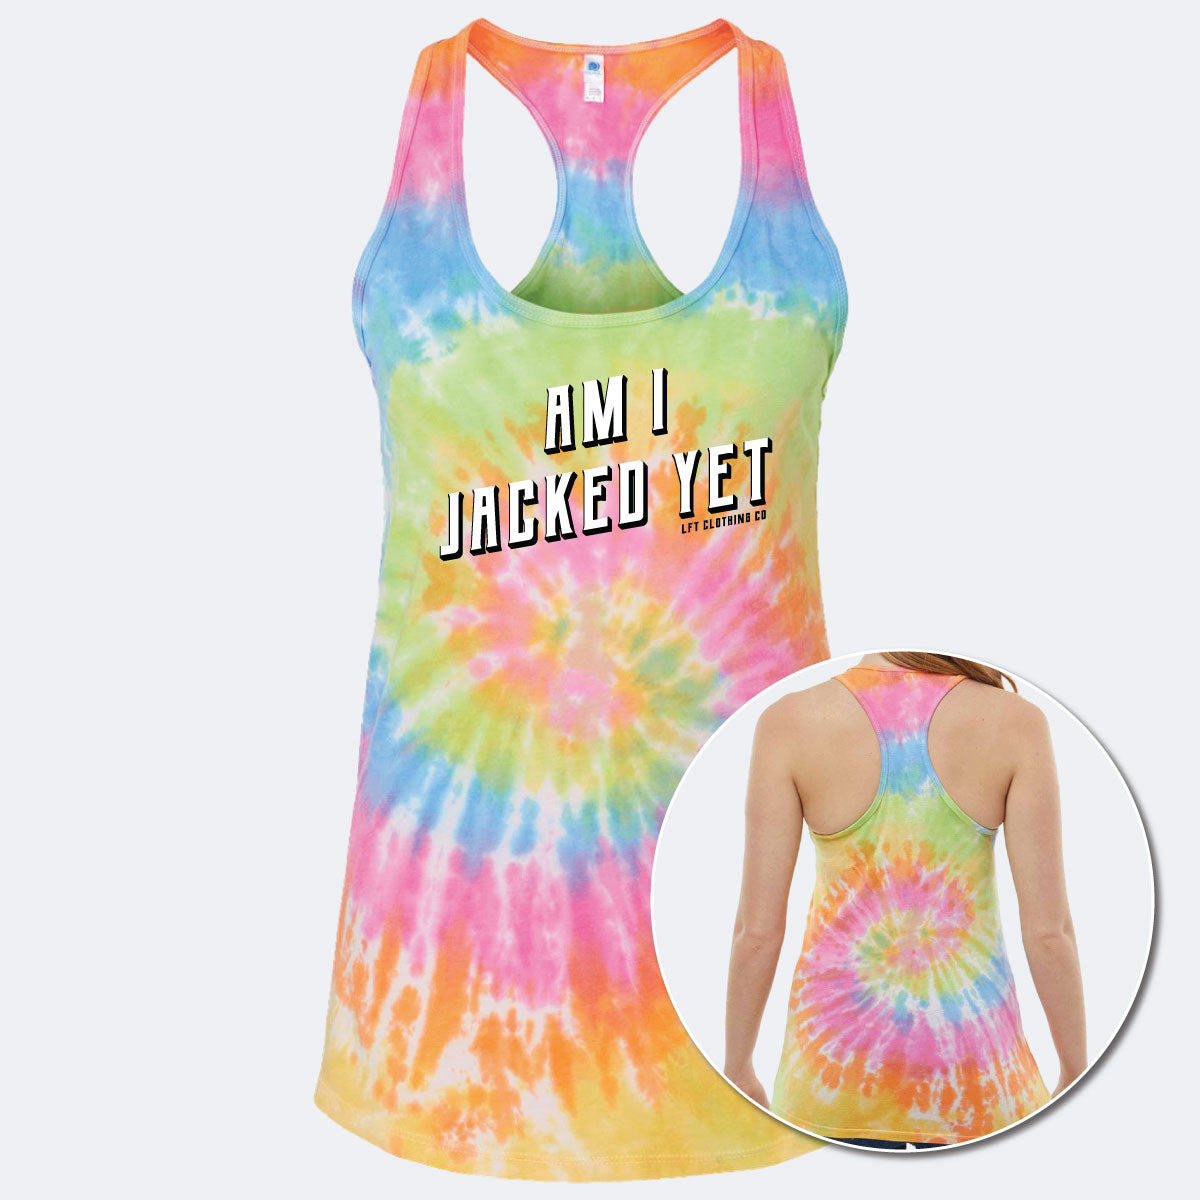 Am I Jacked Yet Tie-Dyed Racerback Tank Top